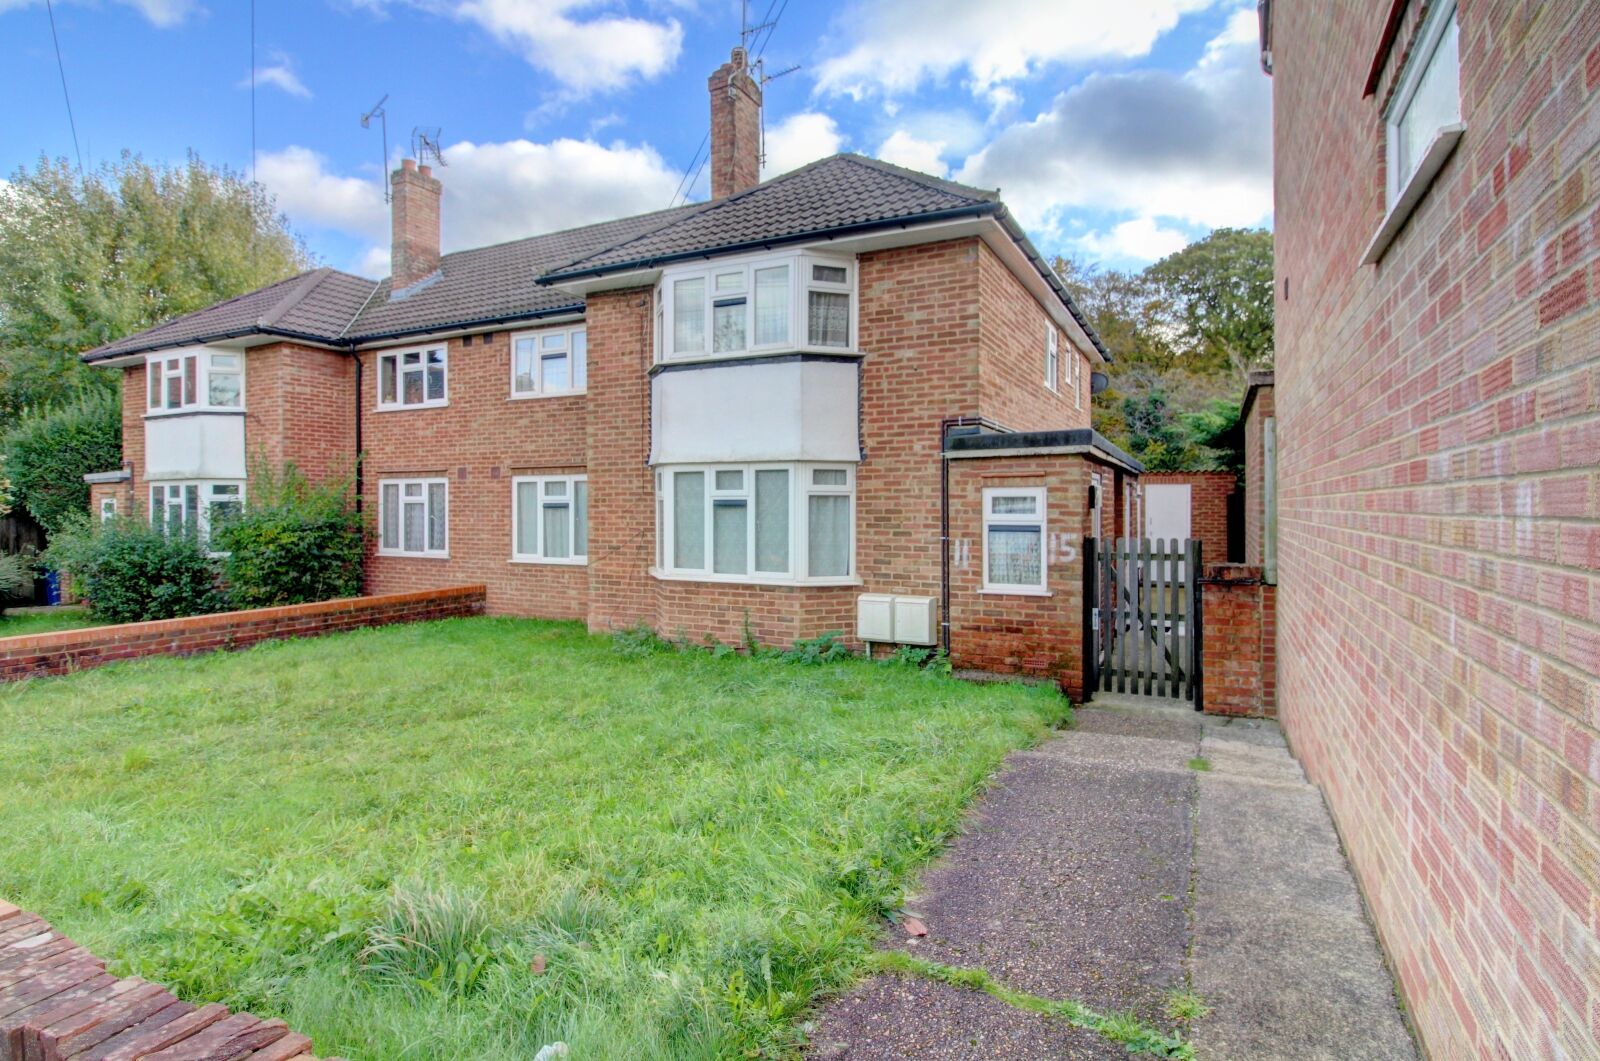 2 bedroom  maisonette for sale Larkfield Close, High Wycombe, HP13, main image